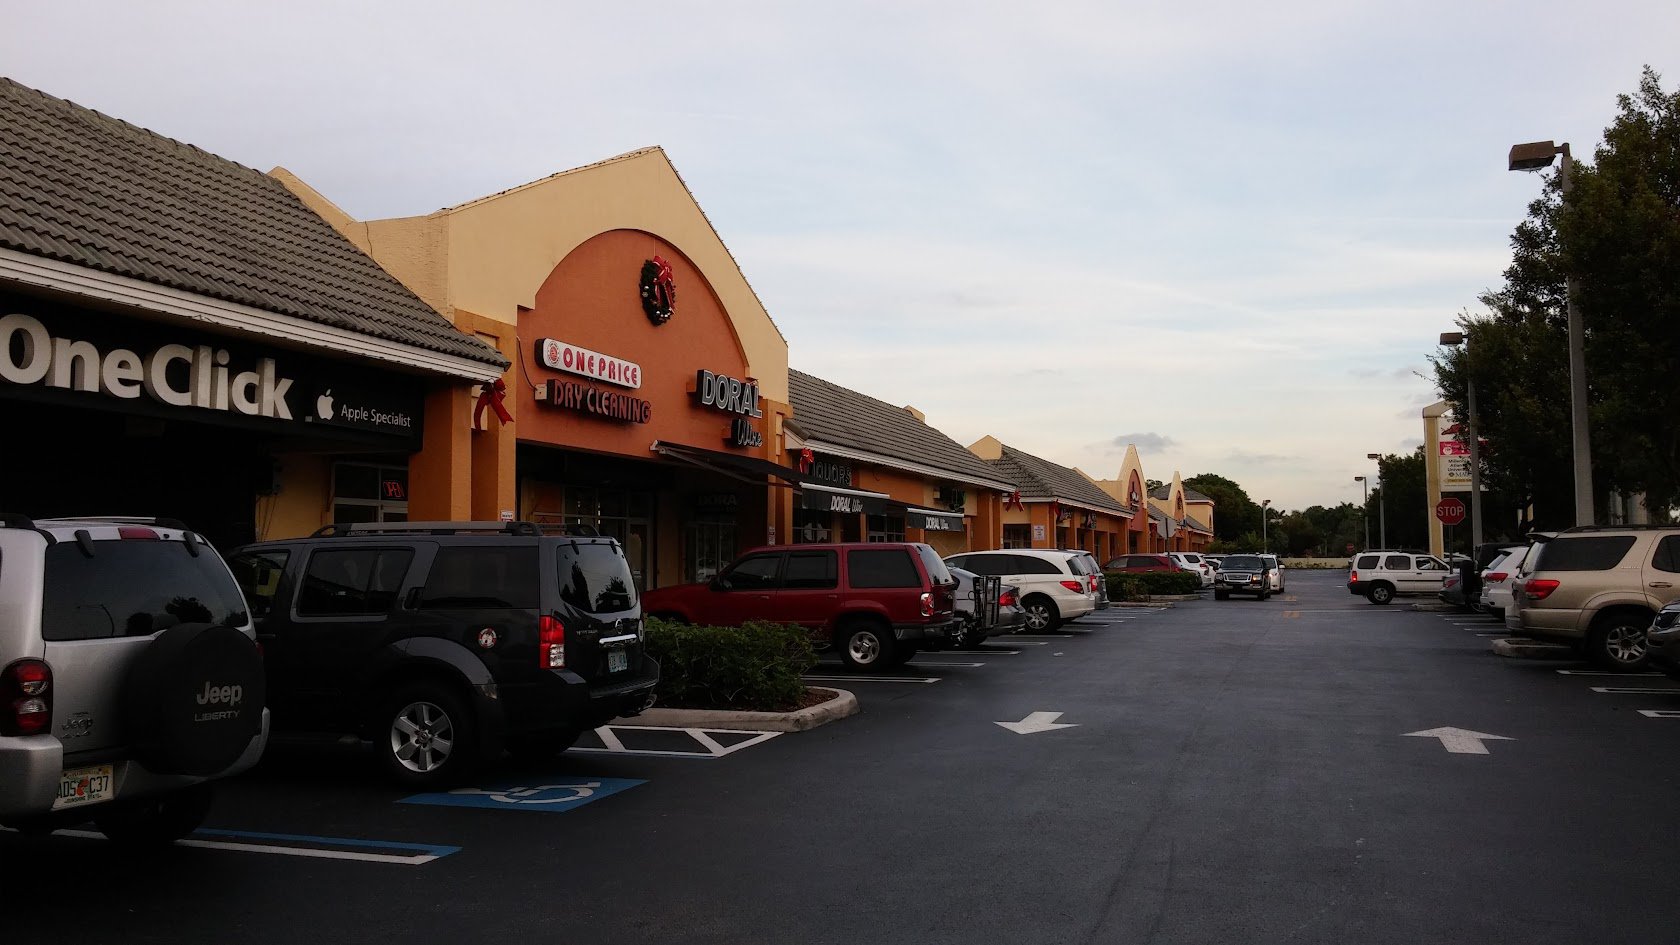 Parking in the Shops in Doral, Florida